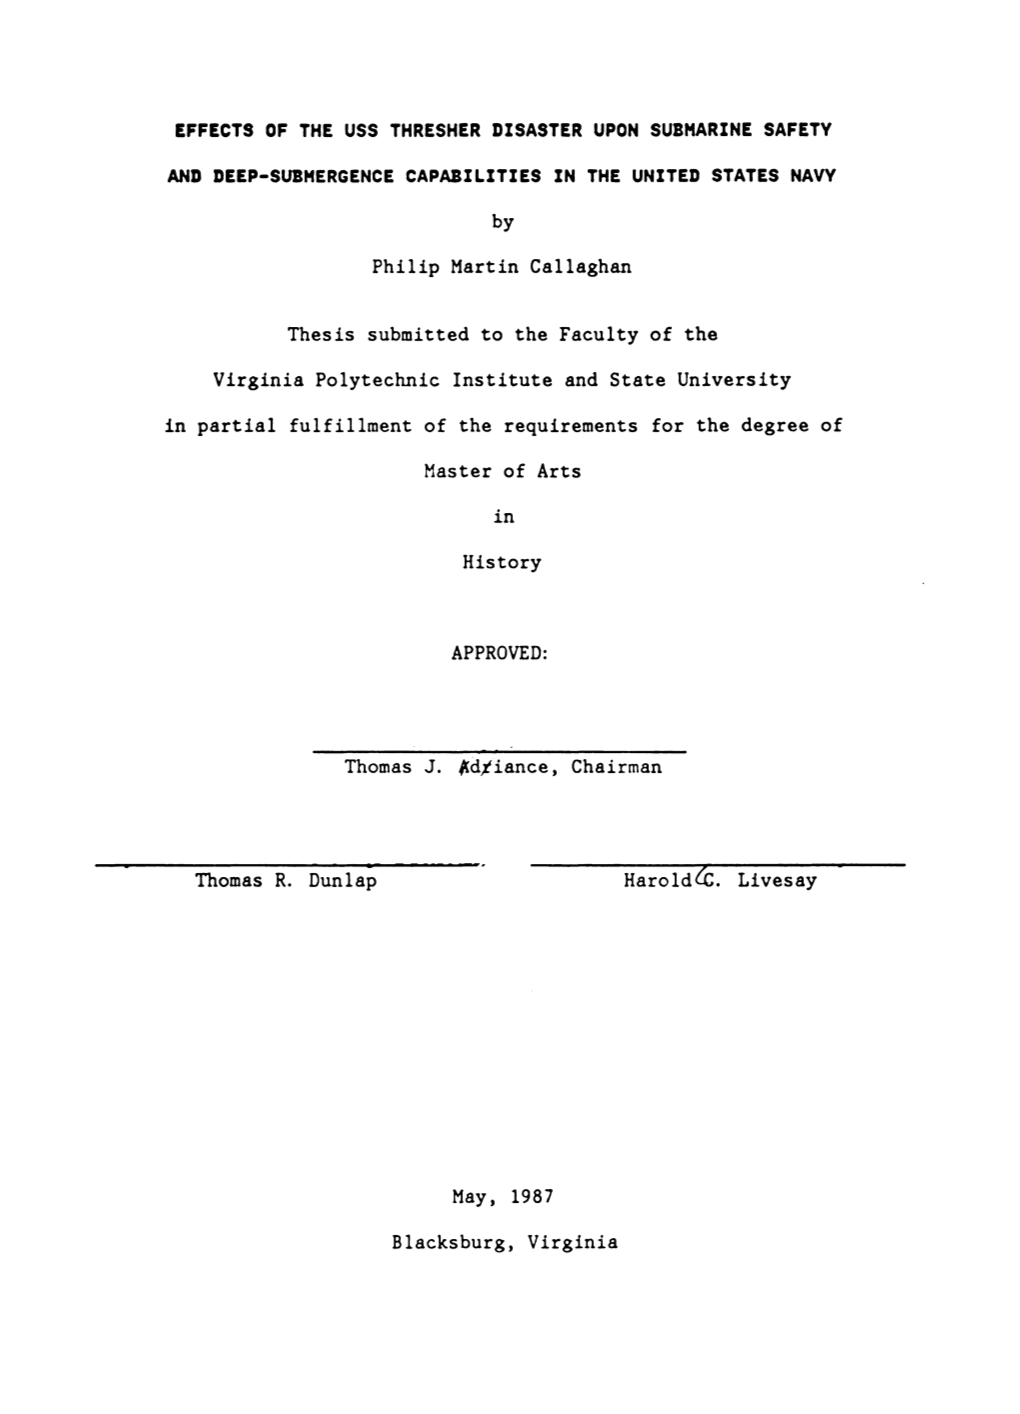 EFFECTS of the USS THRESHER DISASTER UPON SUBMARINE SAFETY and DEEP-SUBMERGENCE CAPABILITIES in the UNITED STATES NAVY by Philip